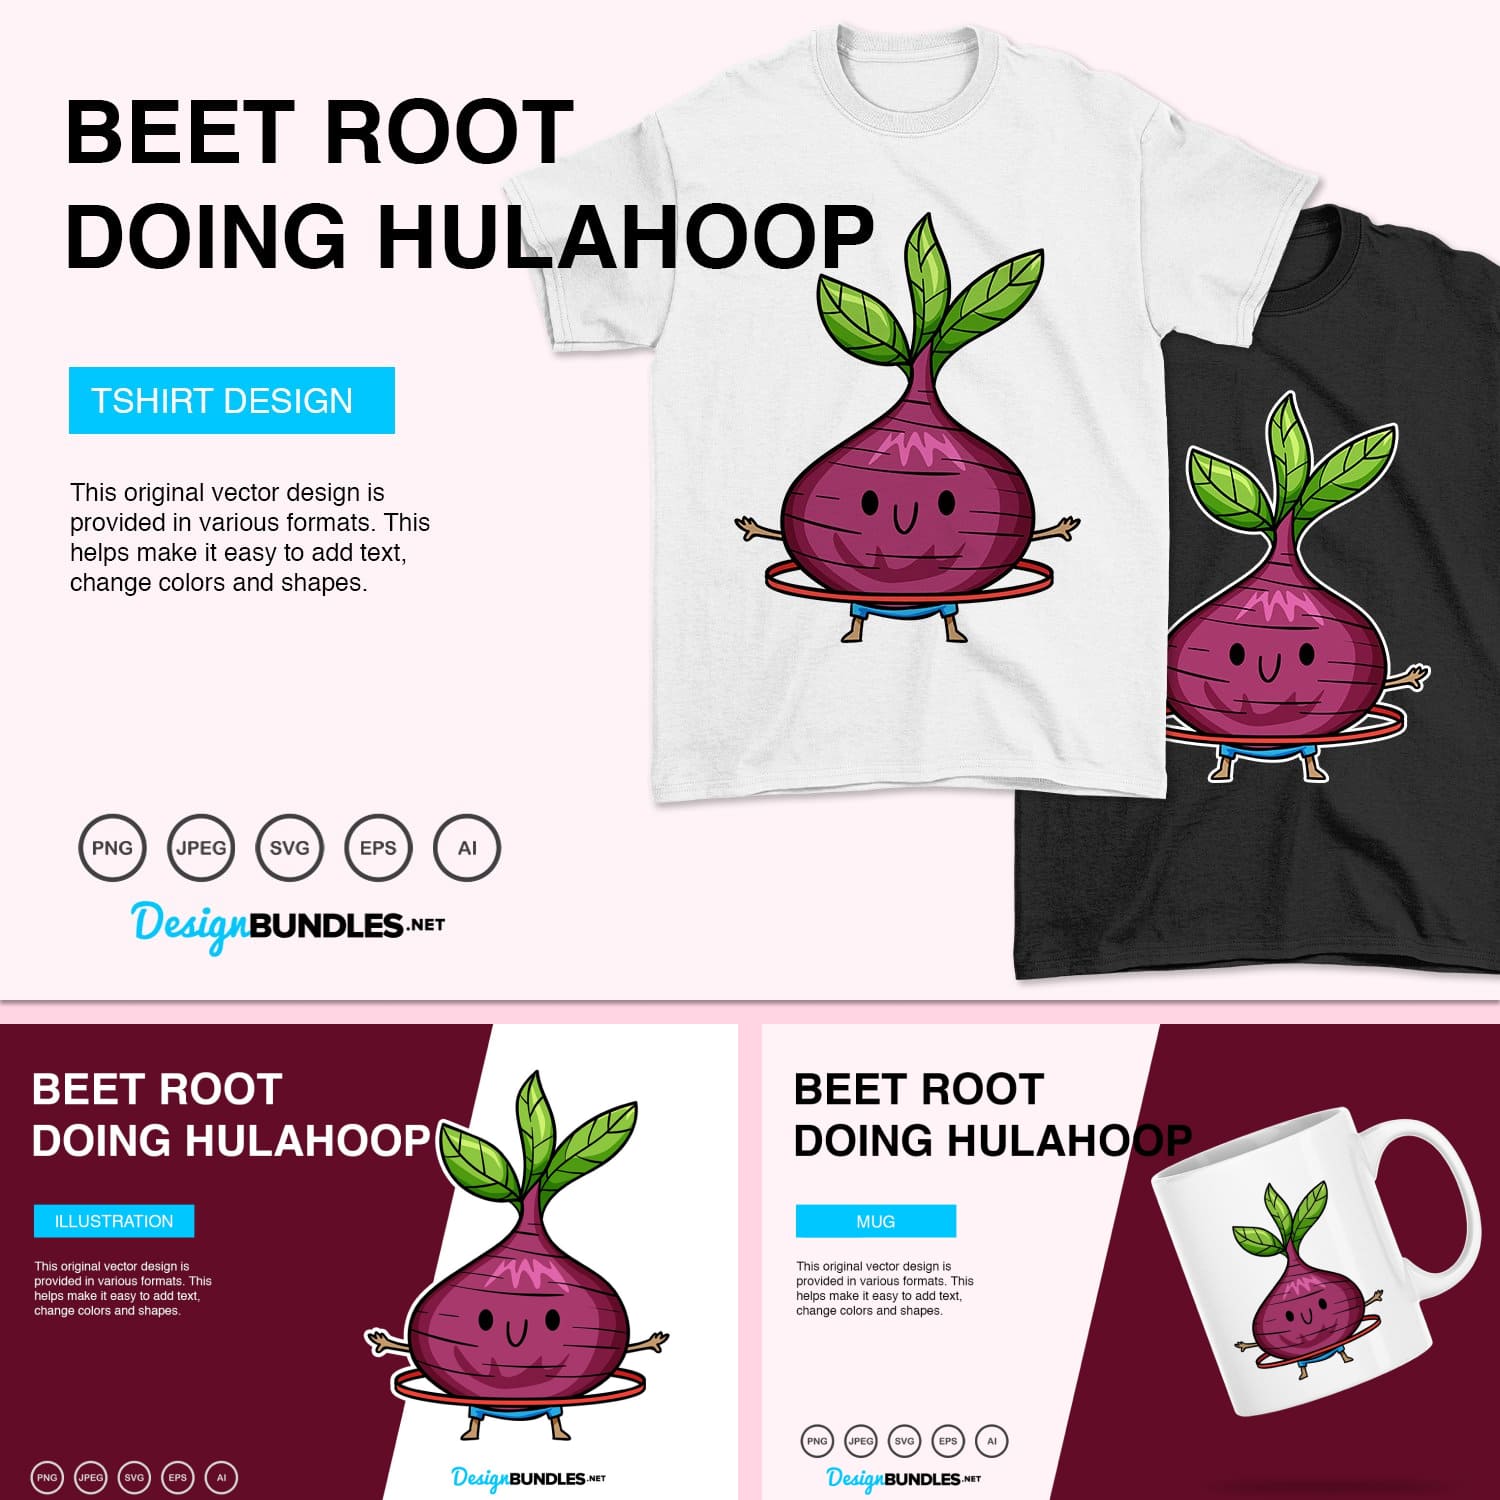 Beet Root Doing Hula Hoop Vector Illustration cover.